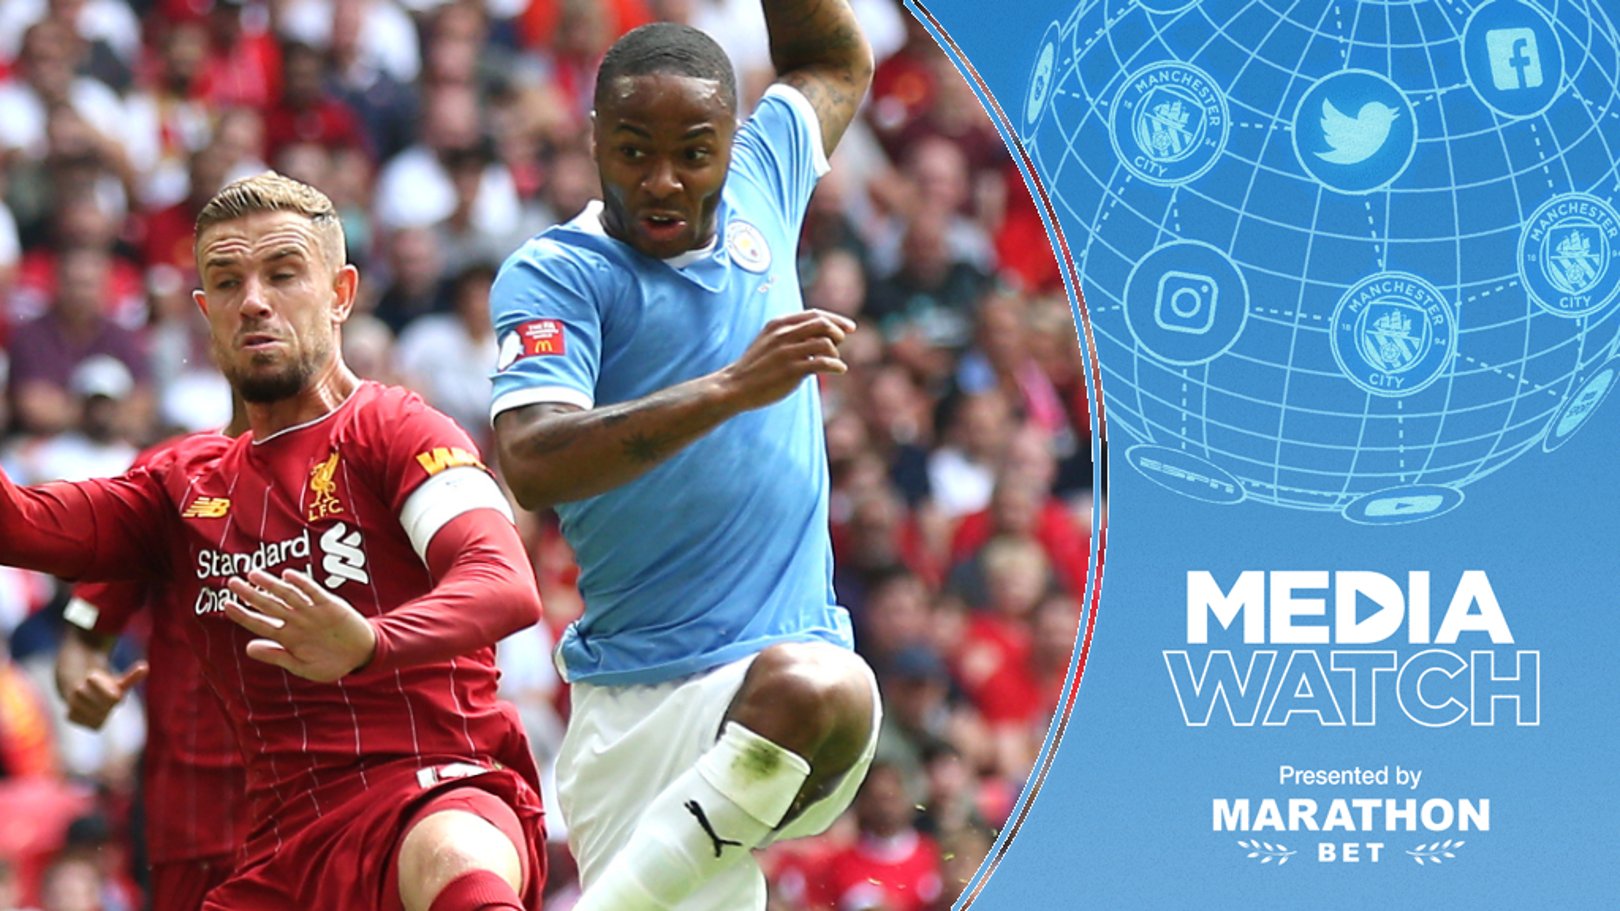 Media: Liverpool v City 'the match of the year?'